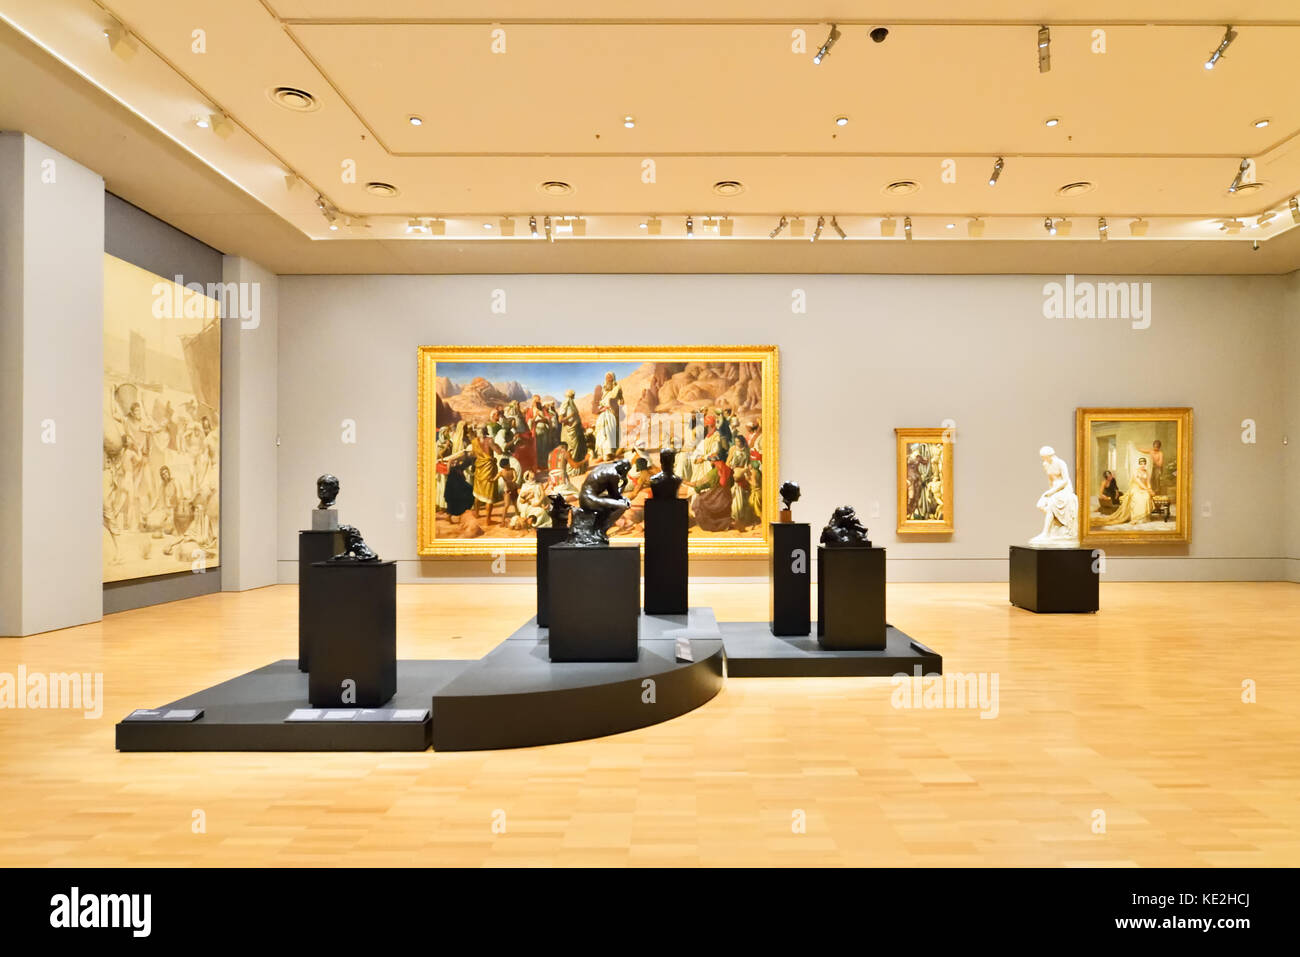 Australia Melbourne. National Gallery of Victoria International. Exhibition space with paintings and sculptures. Stock Photo